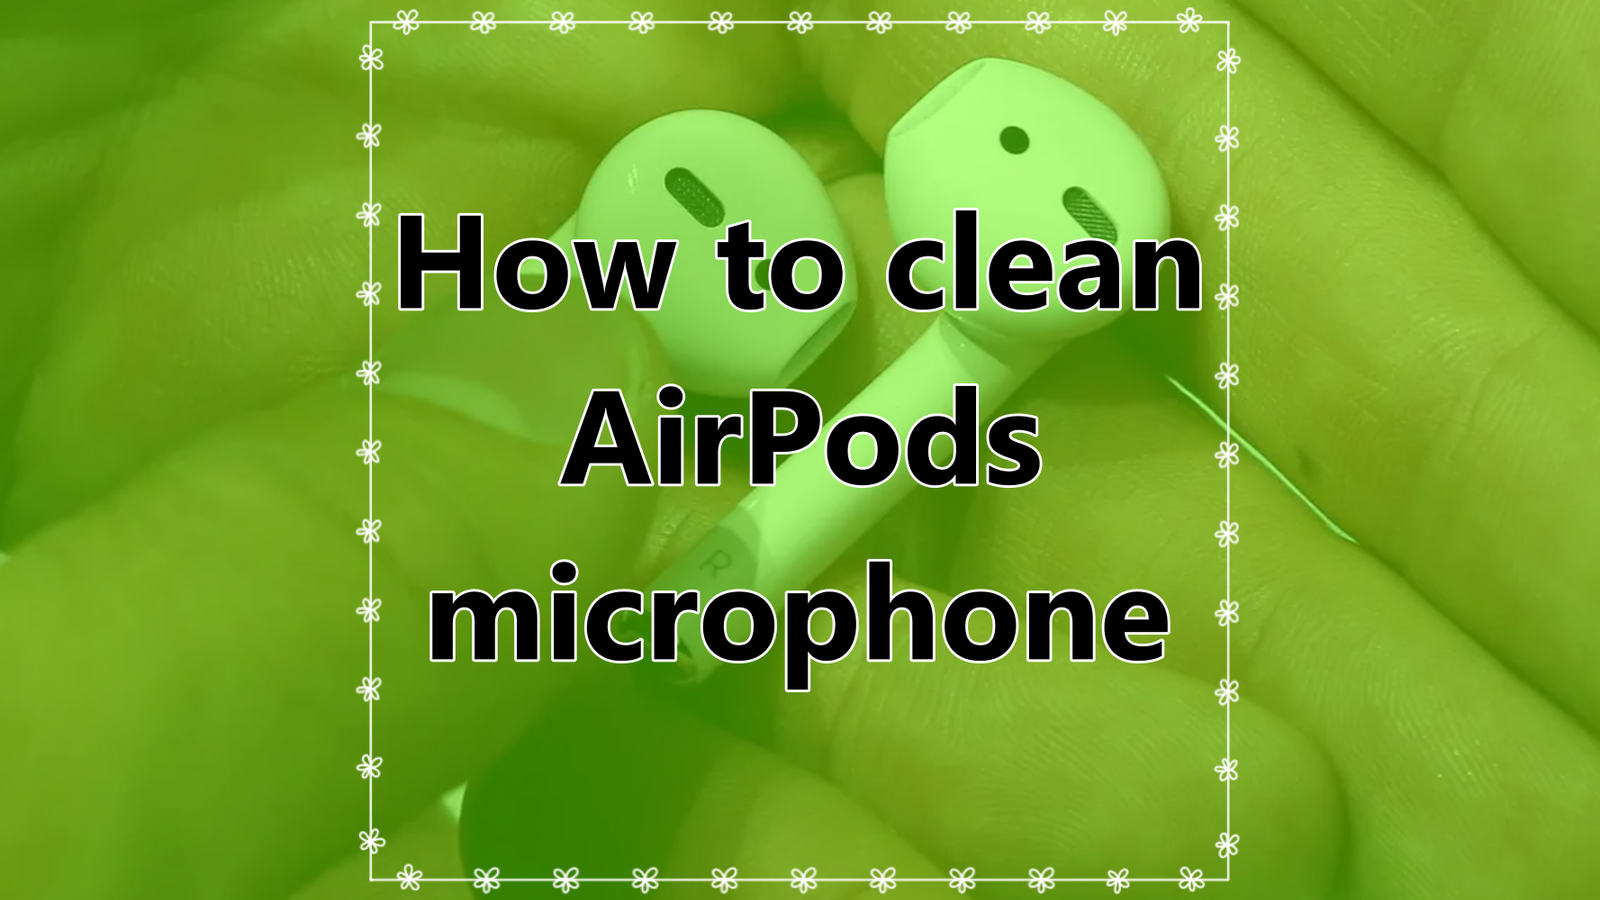 How to clean AirPods microphone